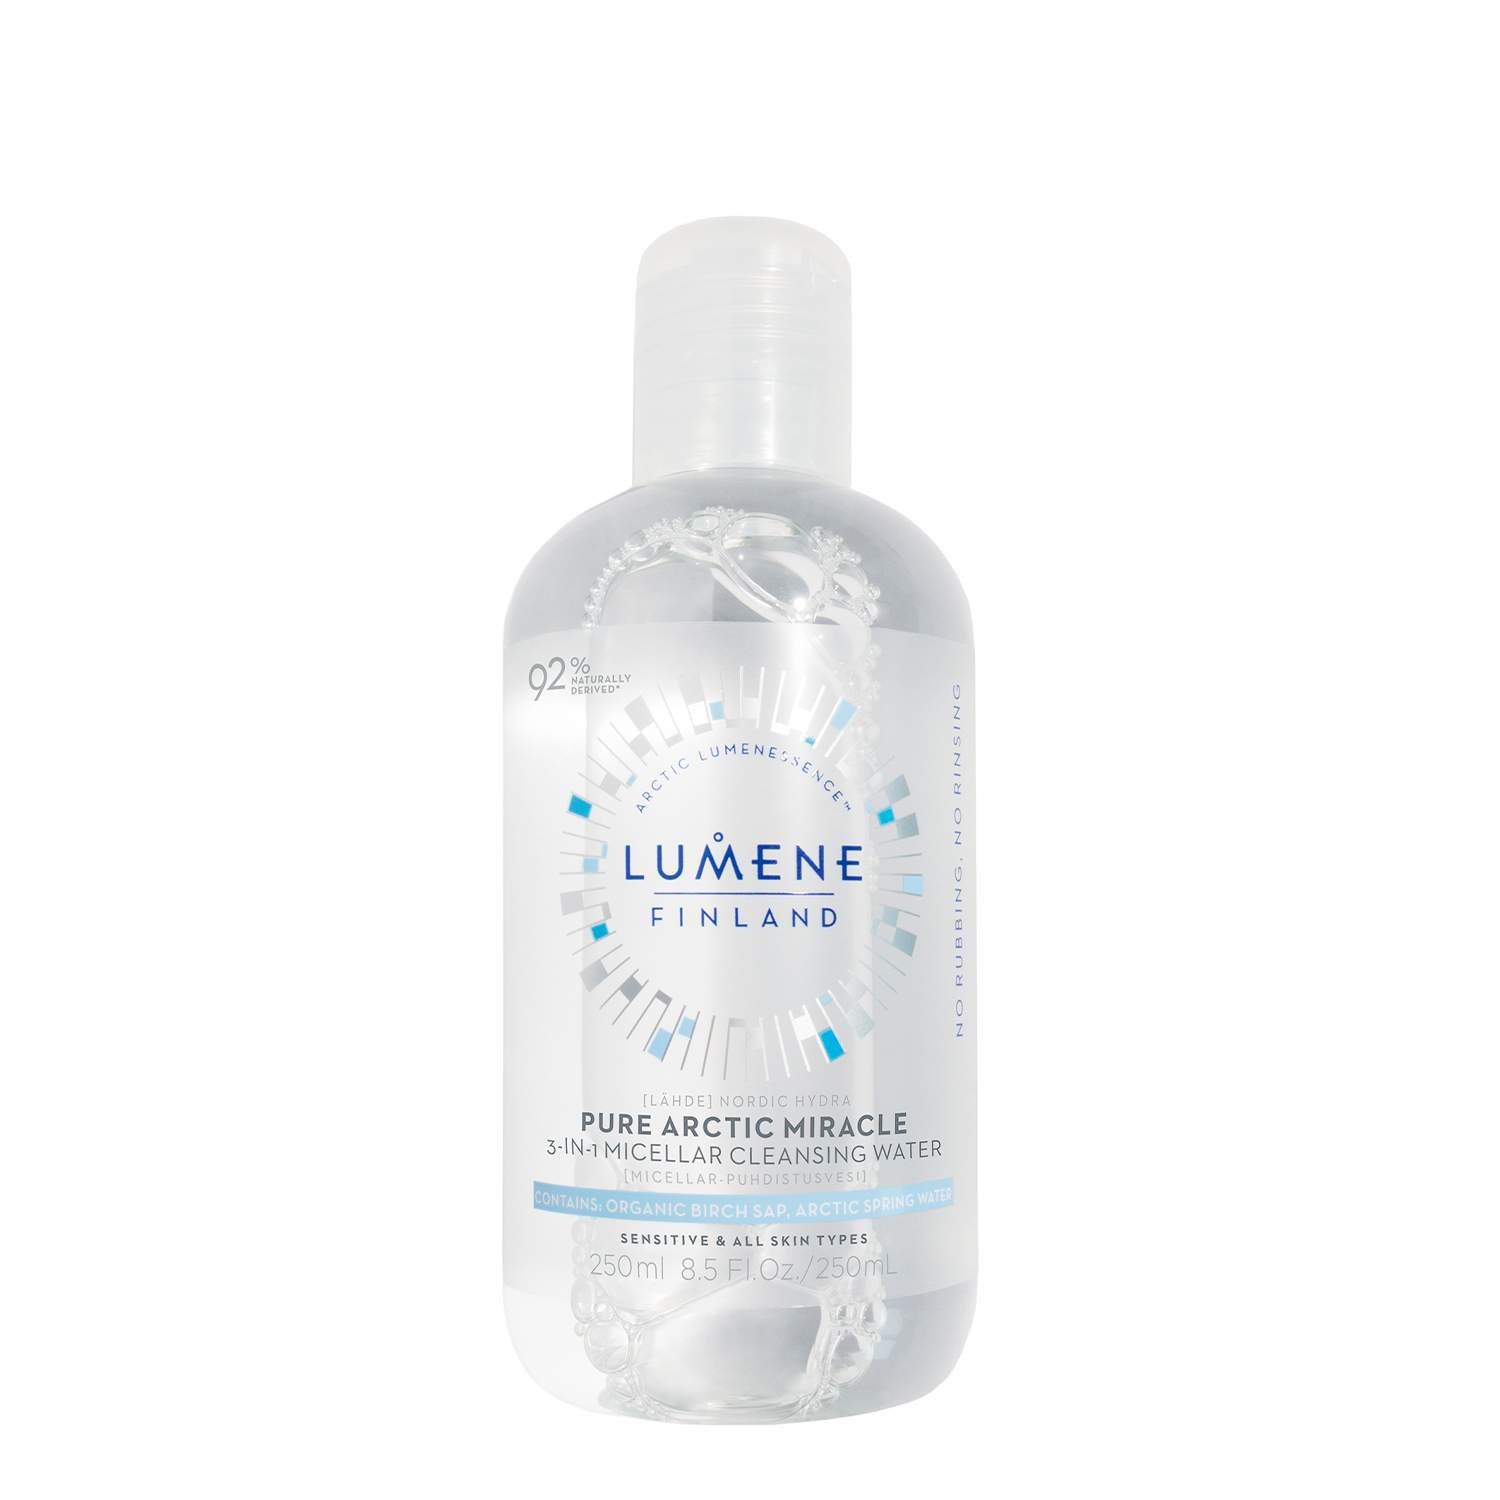 Lumene Nordic Hydra [Lähde] Pure Arctic Miracle 3-in-1 Micellar Cleansing Water  1